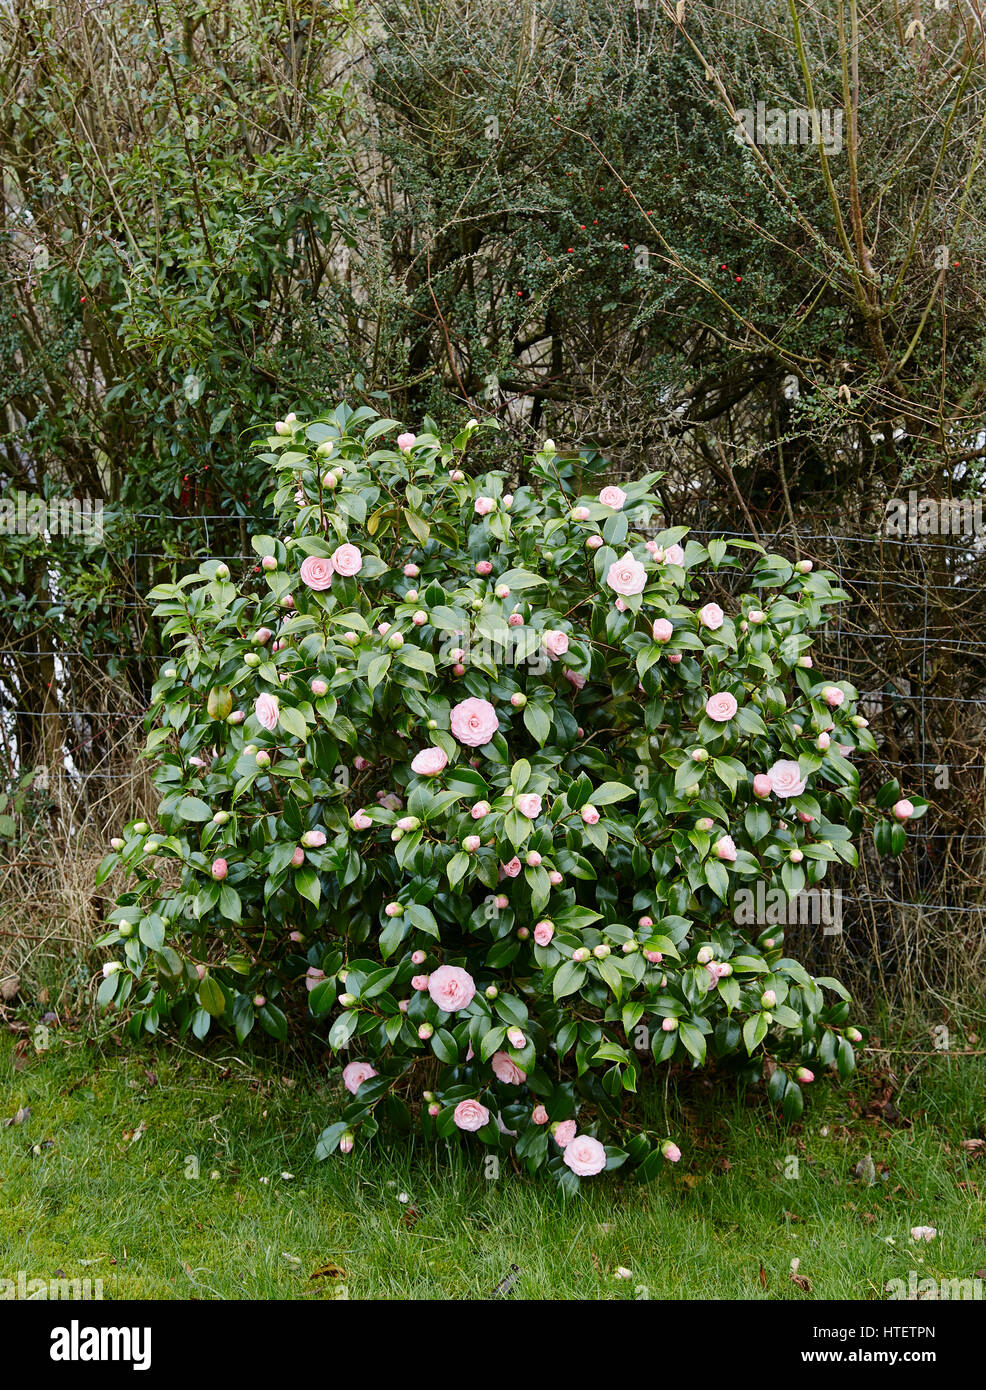 A Pink  Camellia japonica bush showing double pink flowers in a garden setting Stock Photo